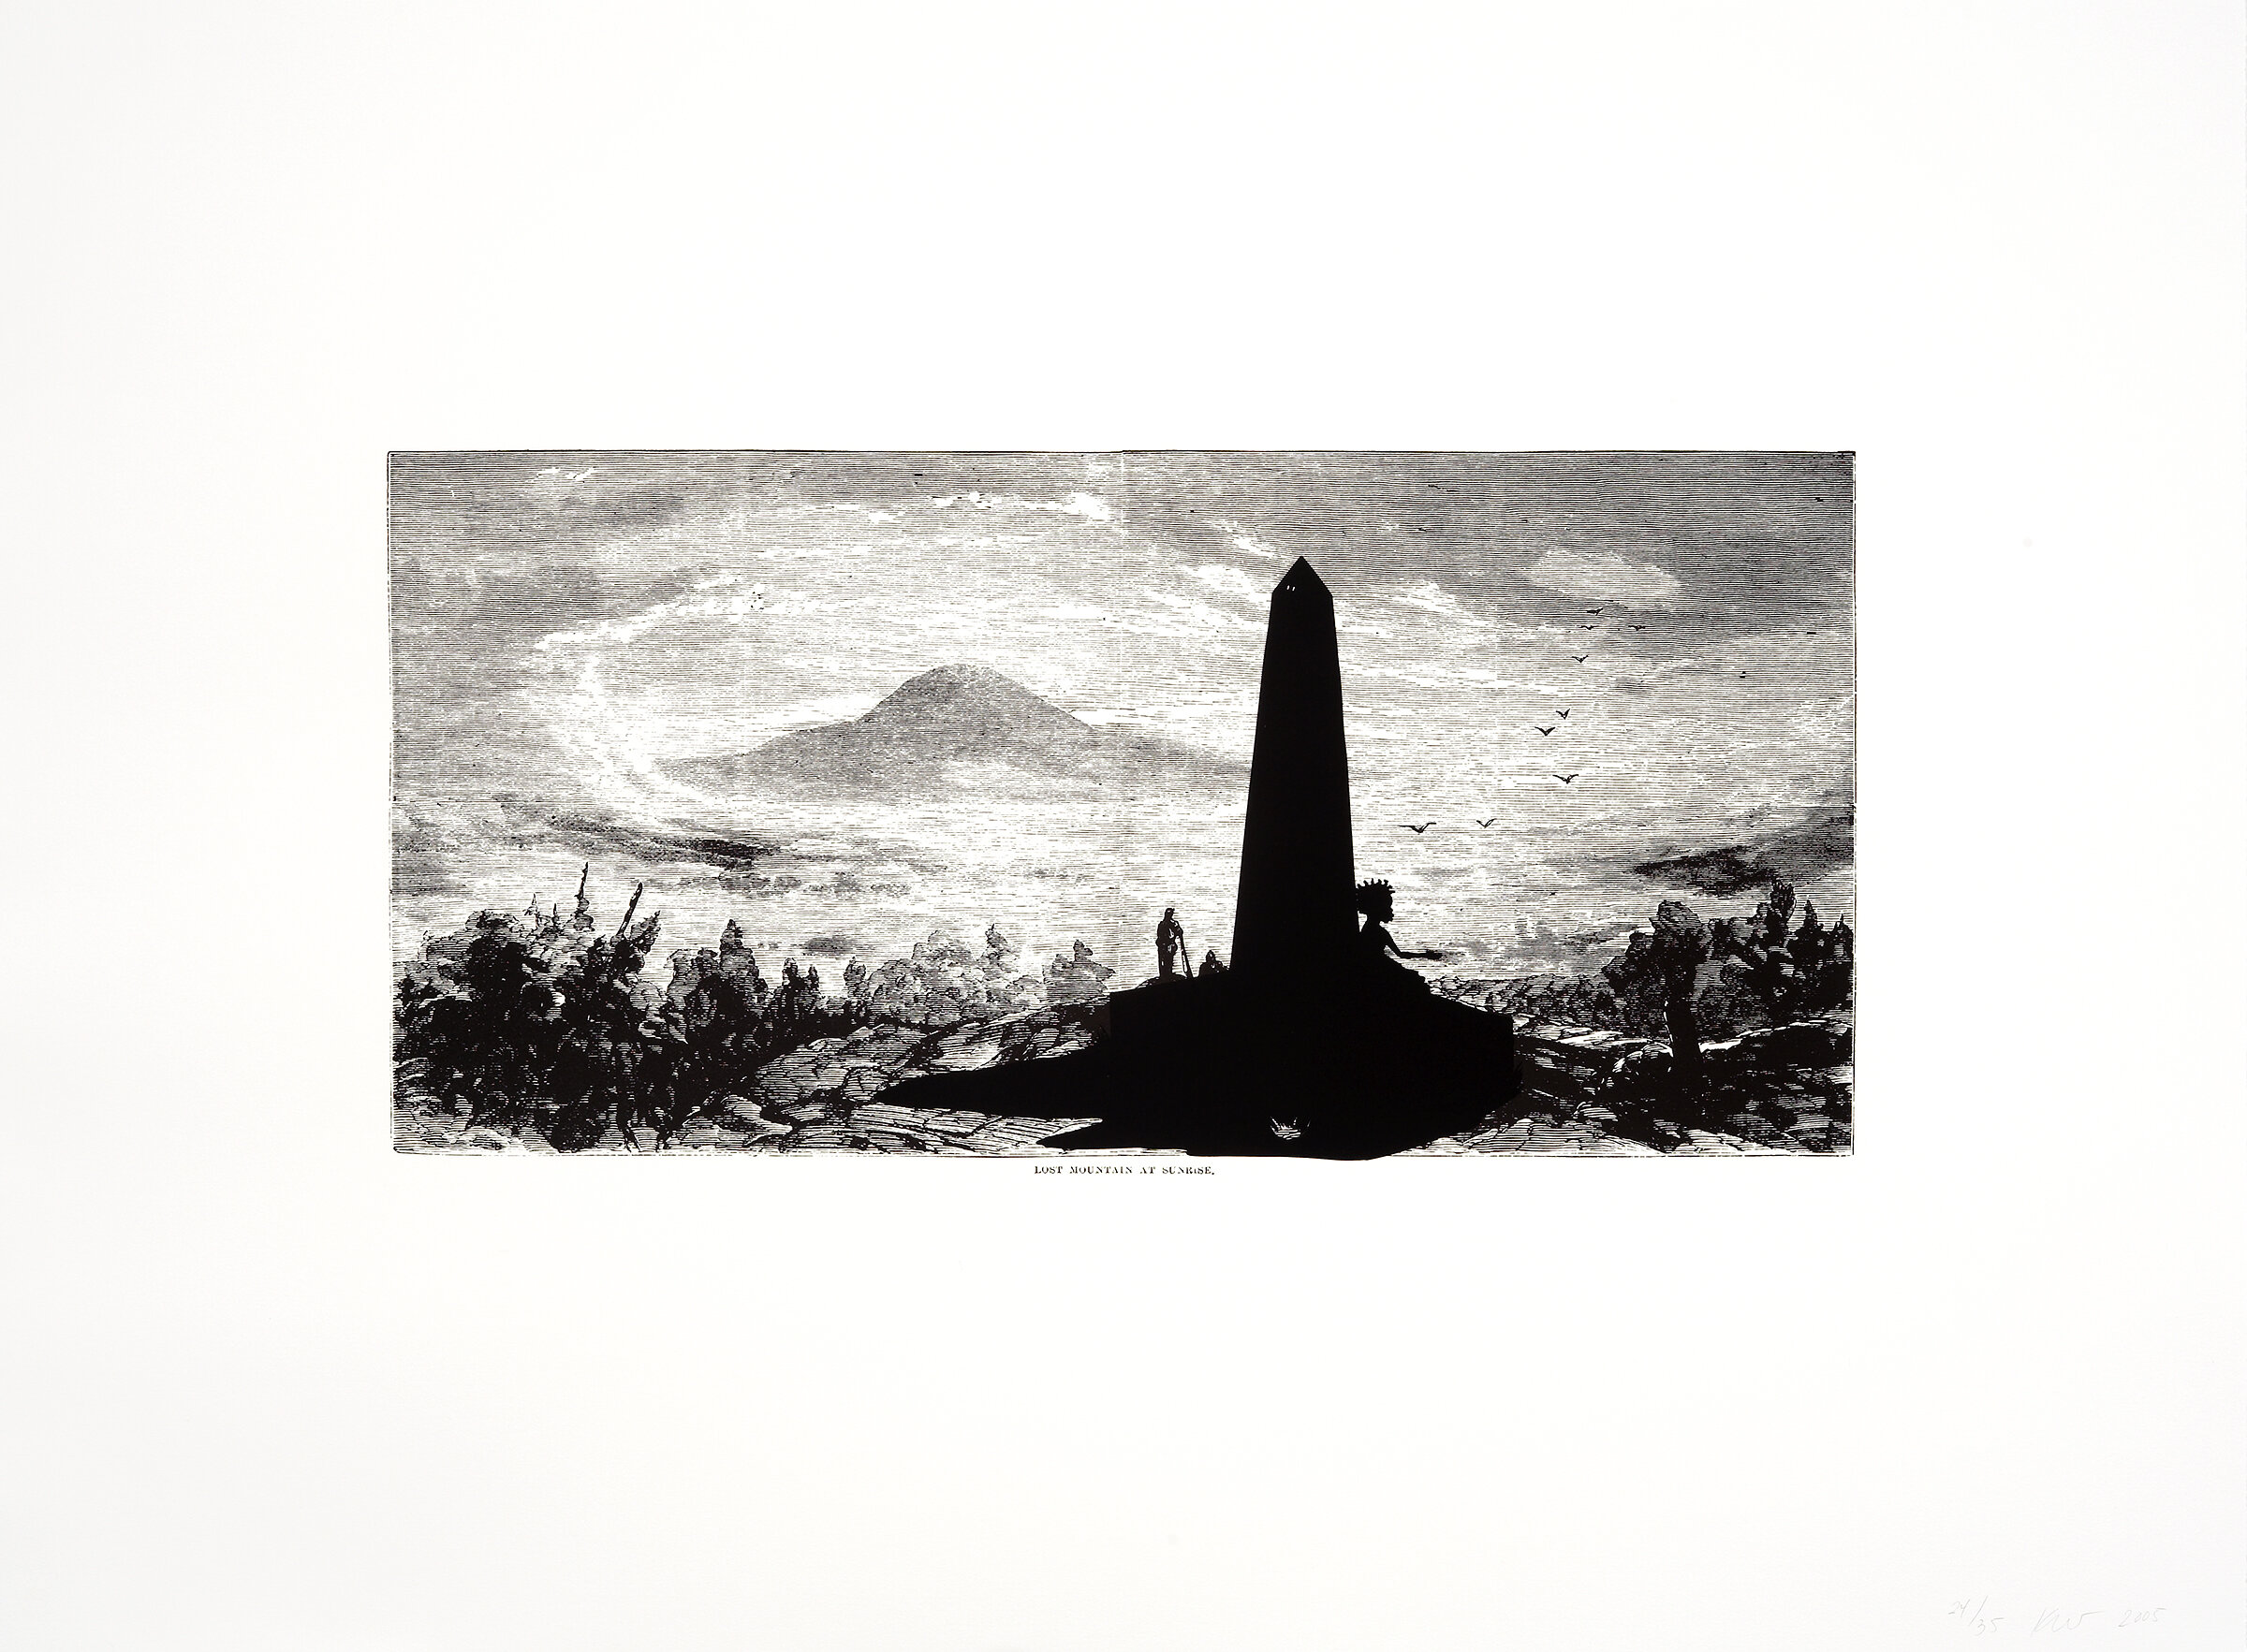   Kara Walker   Harper's Pictorial History of the Civil War (Annotated), Lost Mountain at Sunrise.,  2005 Offset Lithography/Silkscreen 39 x 53 inches Edition of 35 